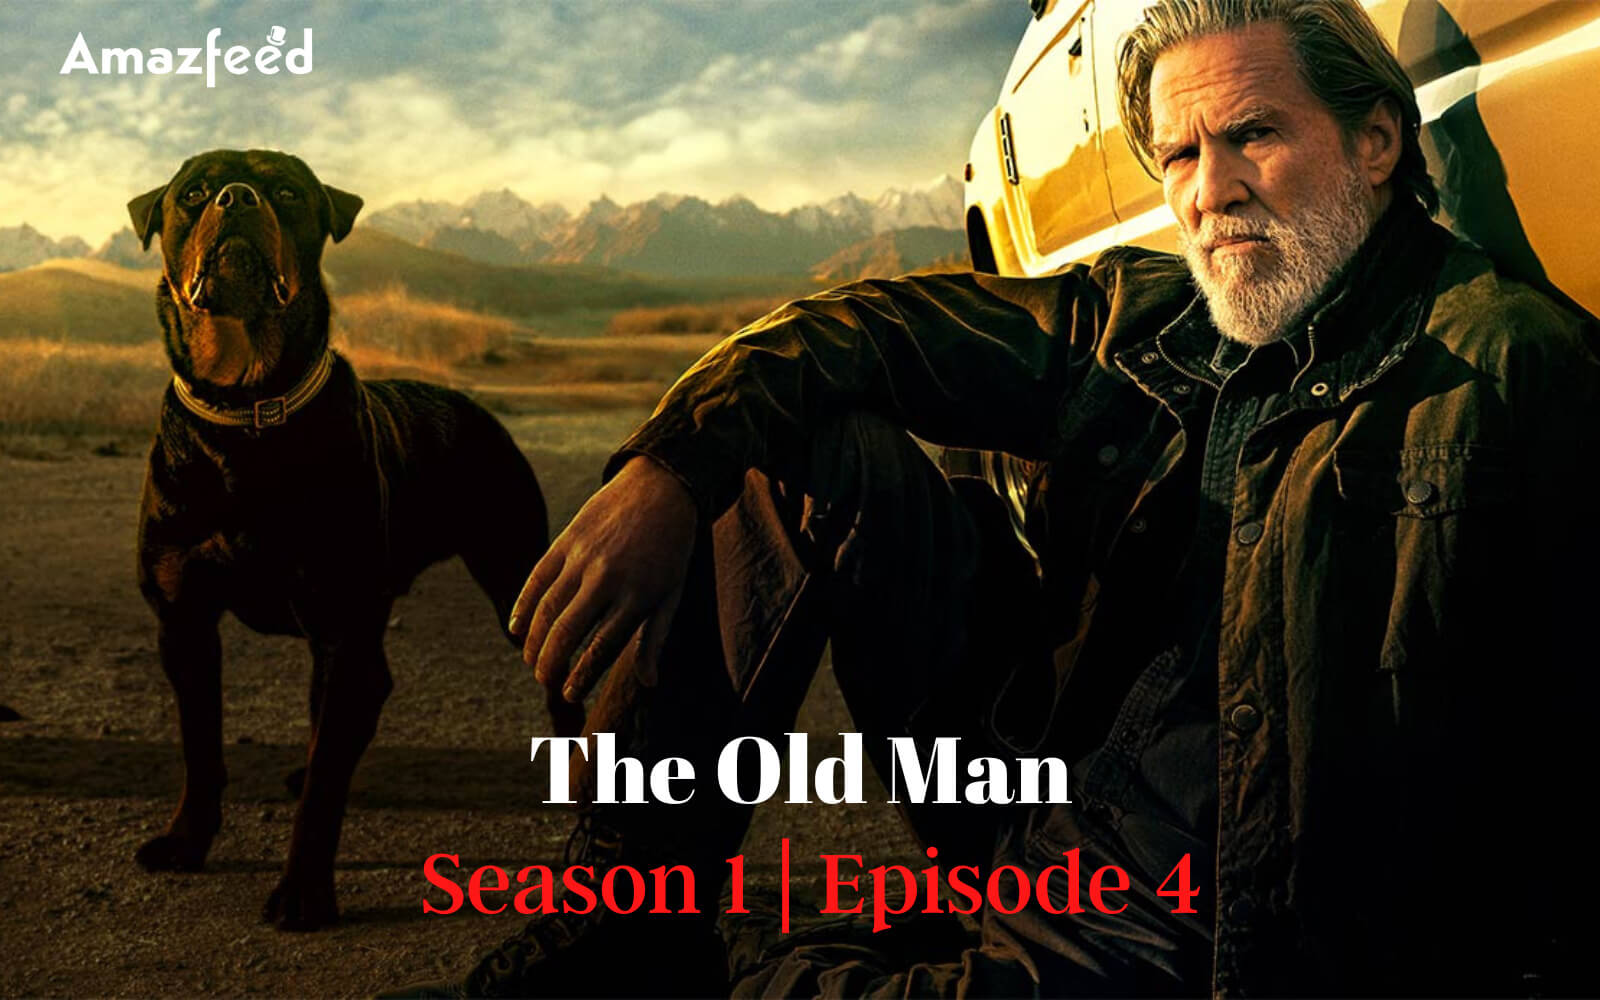 The Old Man Season 1 Episode 4 Release date